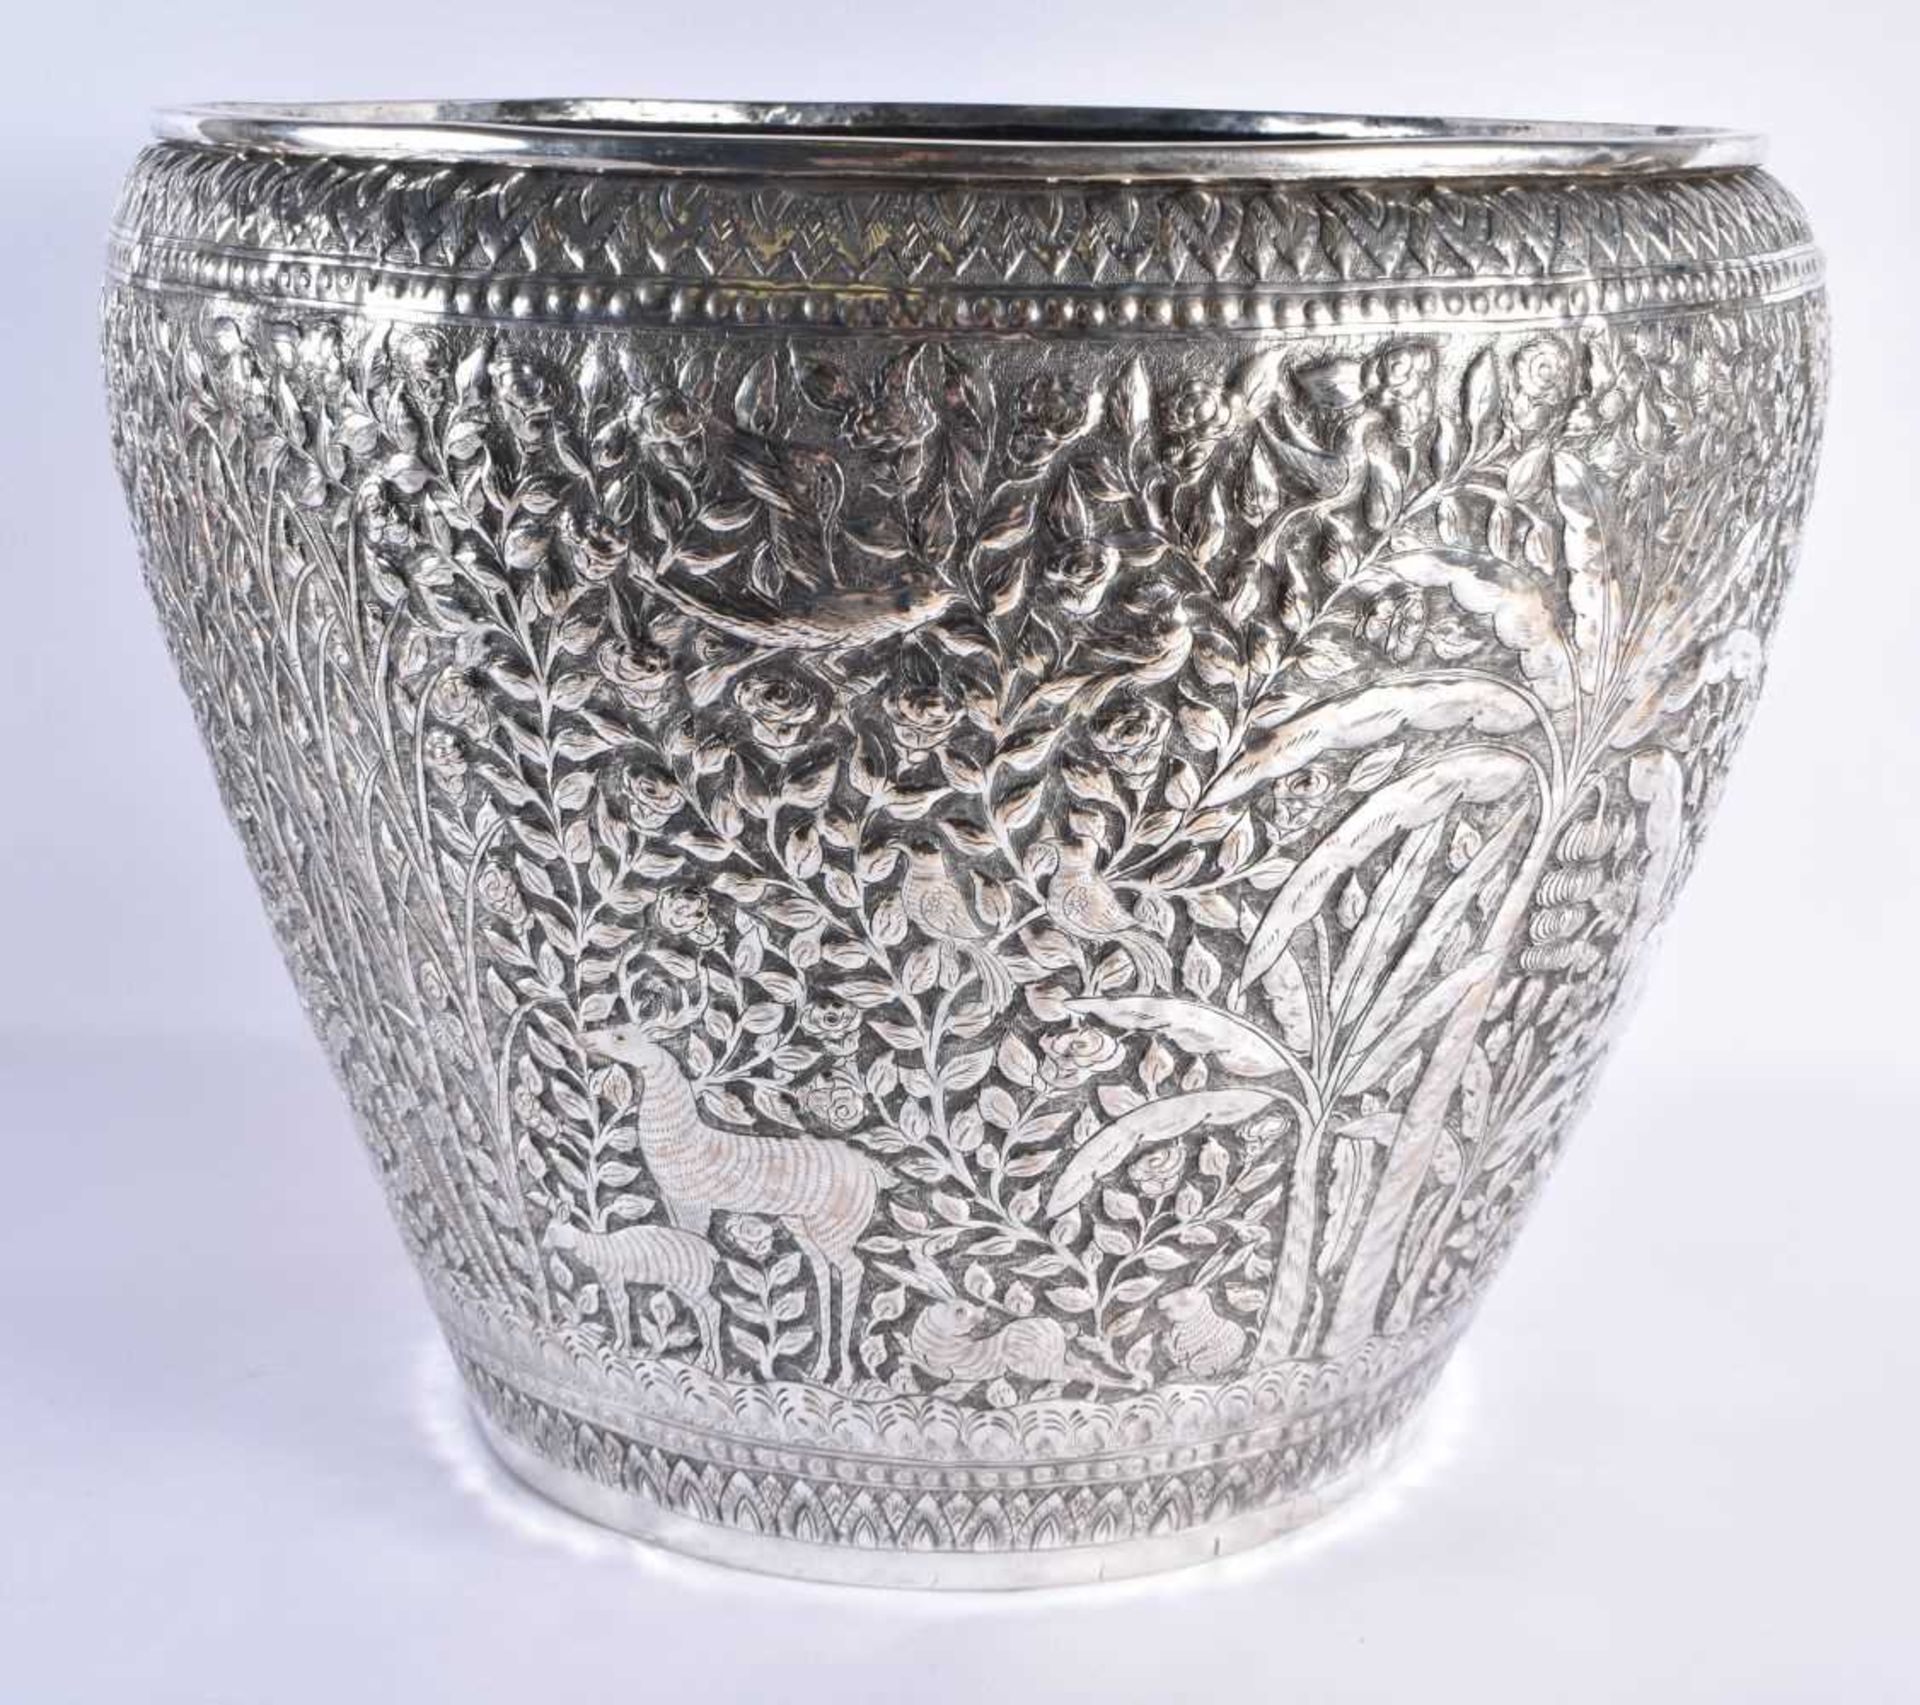 A VERY LARGE LATE 19TH CENTURY INDIAN WHITE METAL JARDINIERE decorative with animals and palm trees, - Image 2 of 5